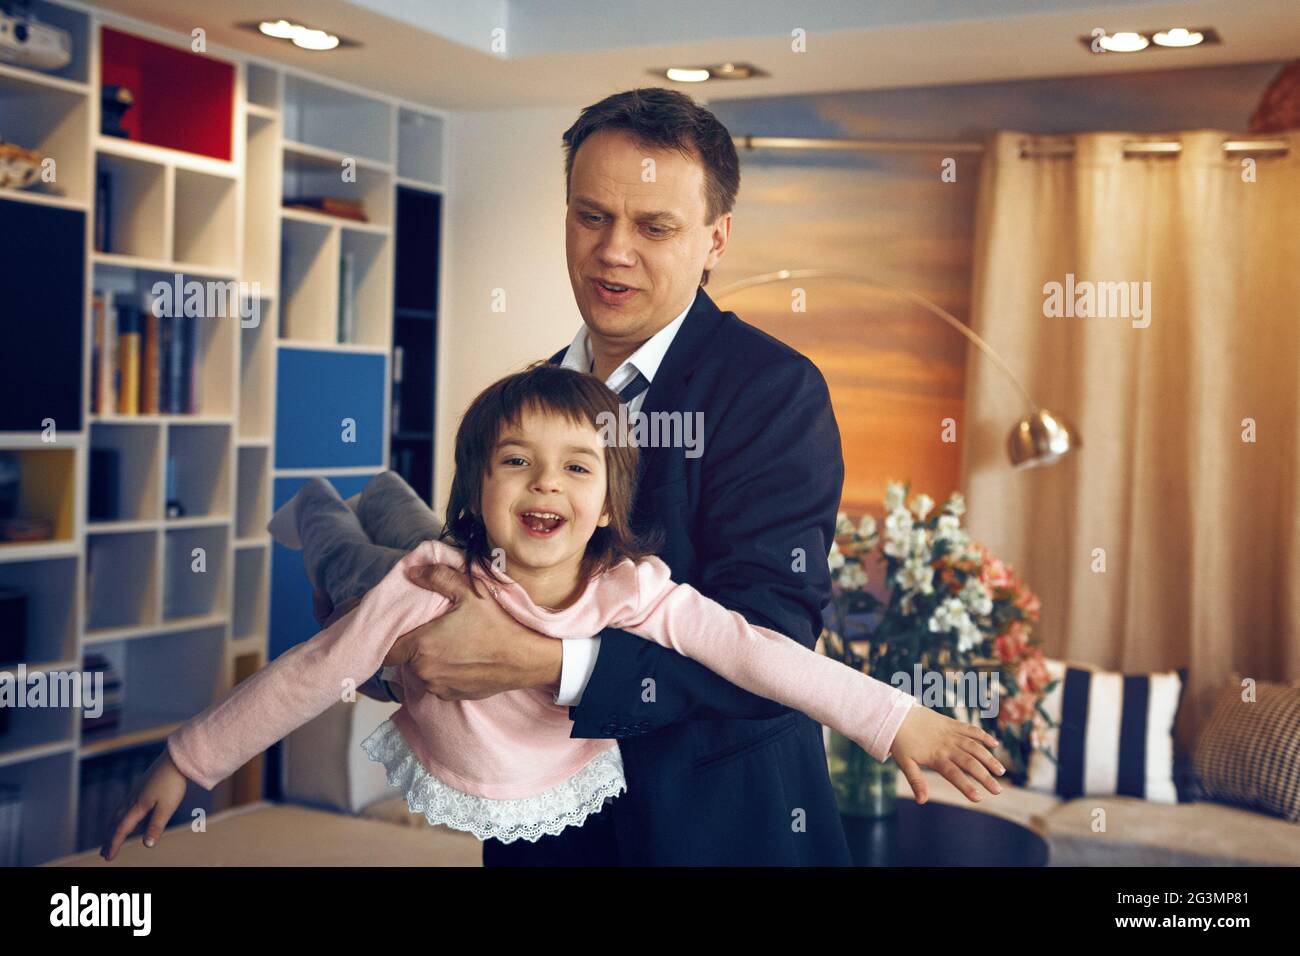 Father businessman plays with daughter Stock Photo